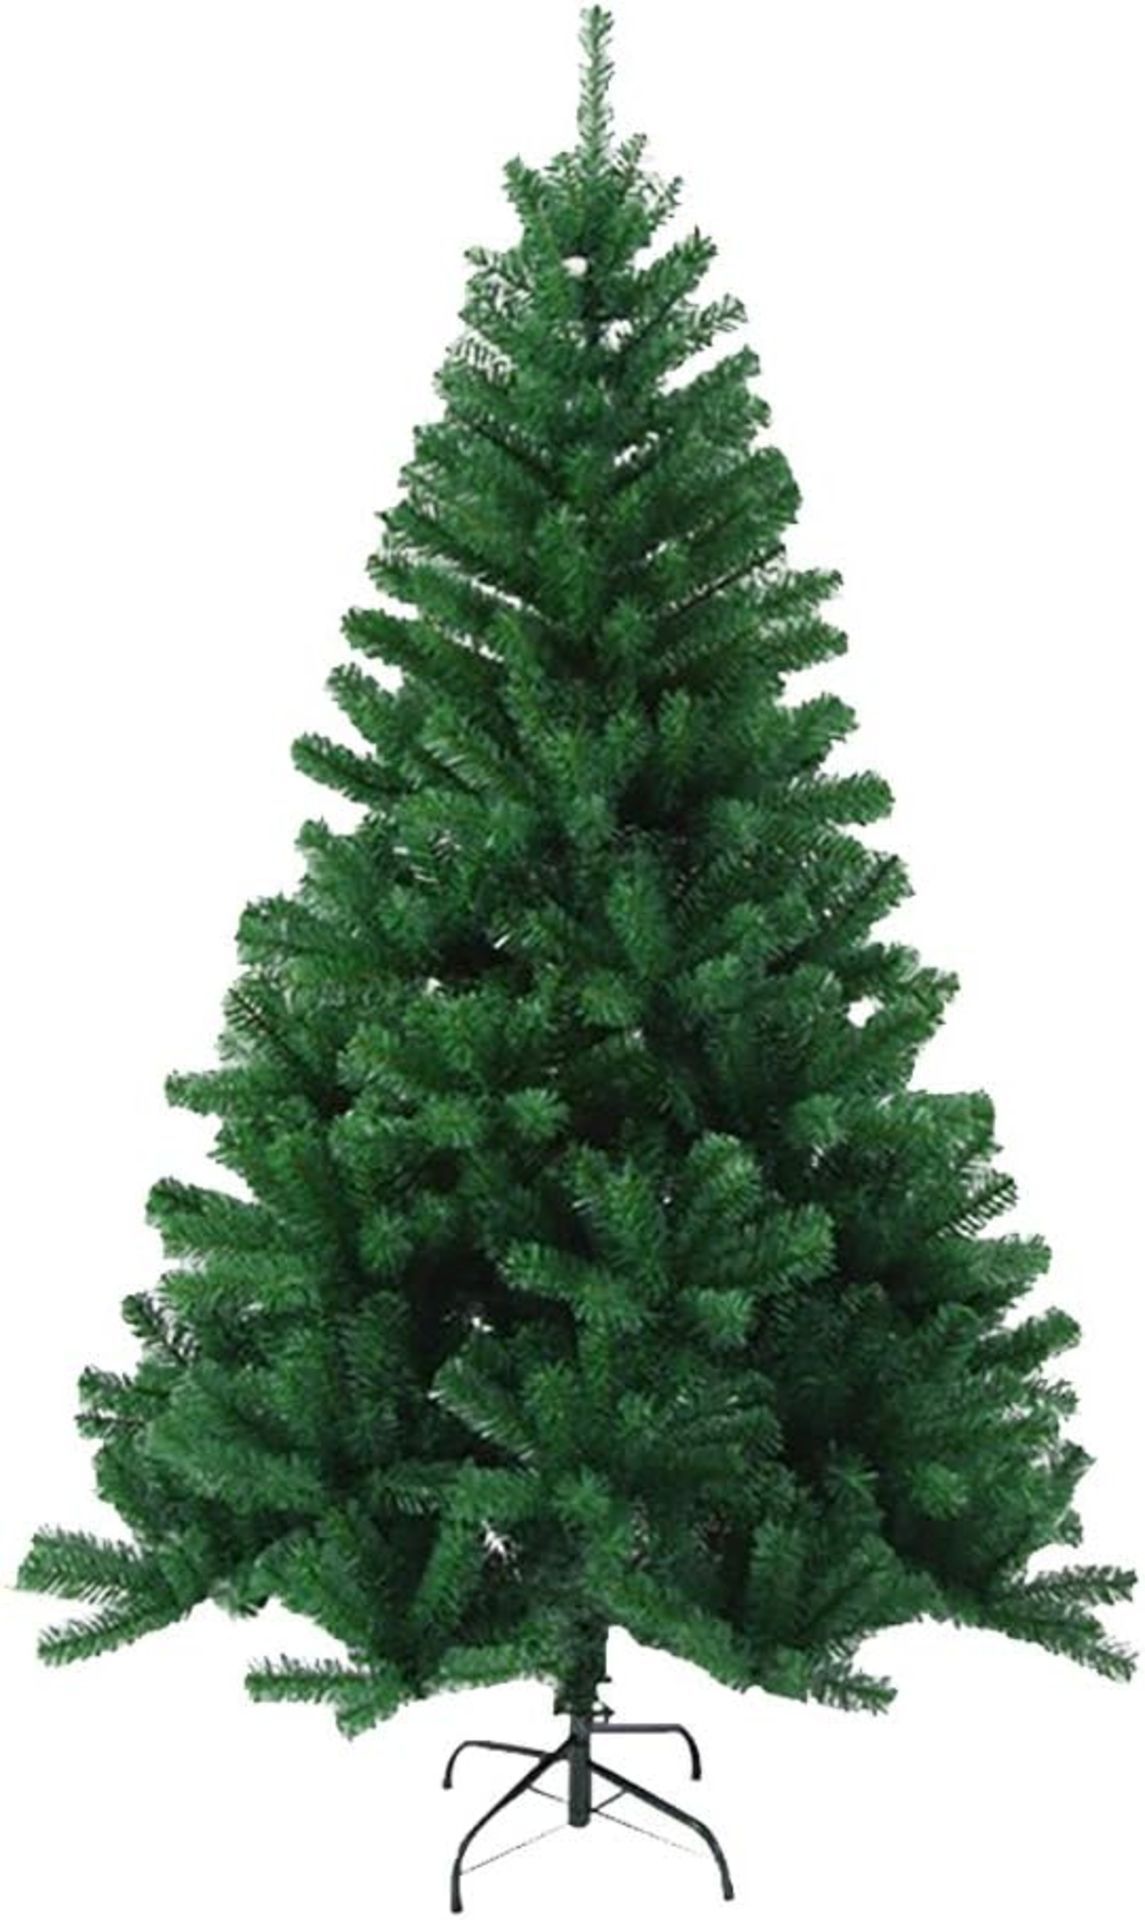 TRADE LOT 10 x Brand New Luxury 6ft Green 700 Tip Christmas Trees